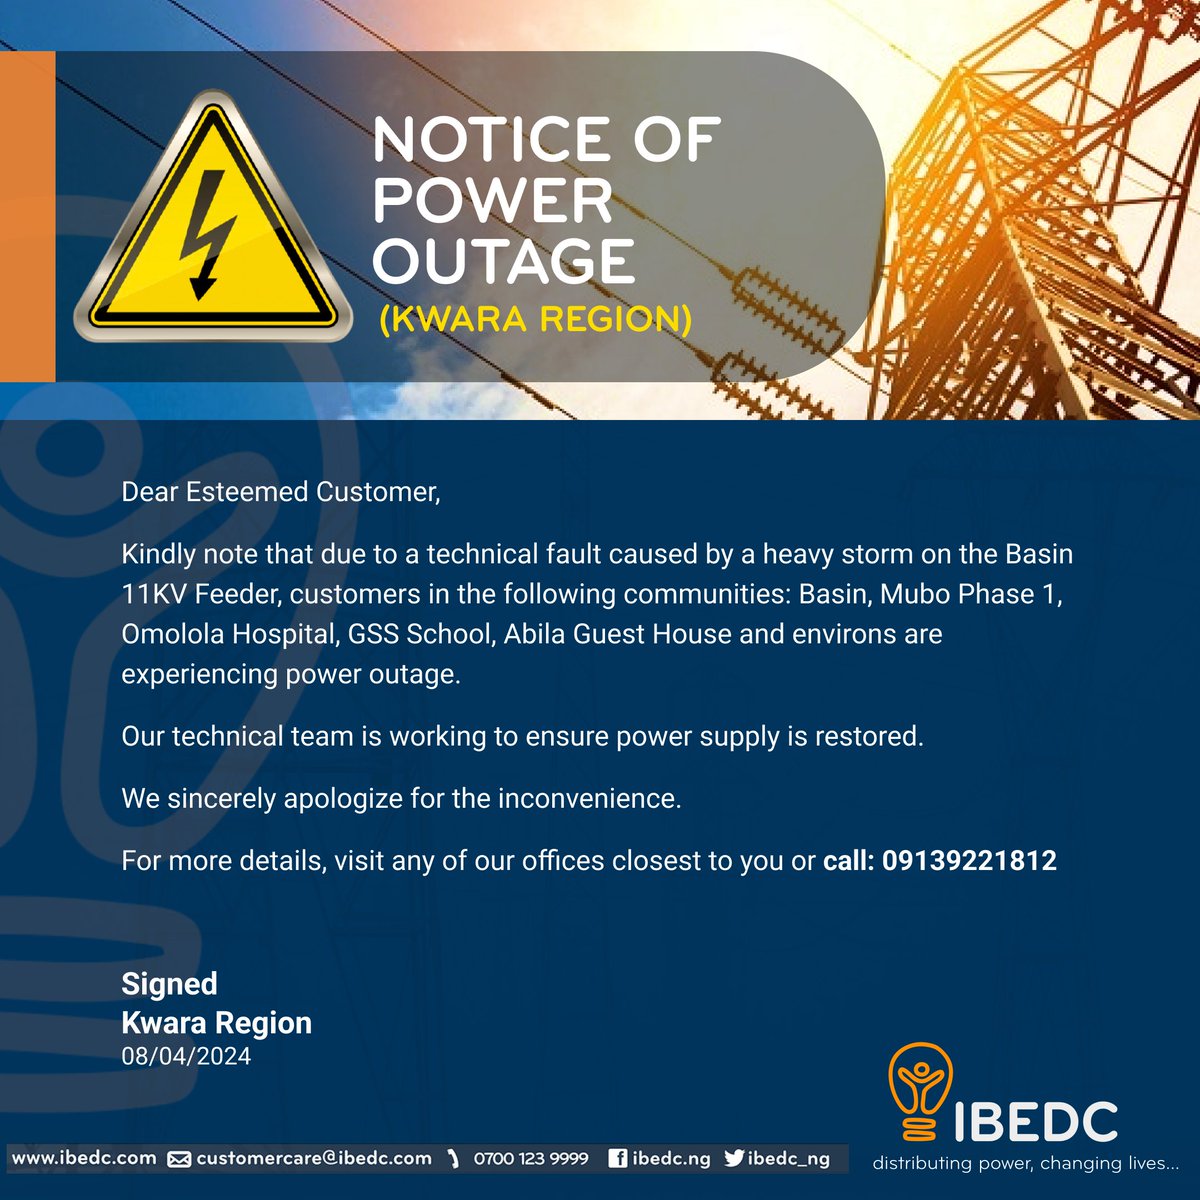 Notice of Power Outage #ibedc #poweroutage #notice #Kwara #distributingpower #changinglives